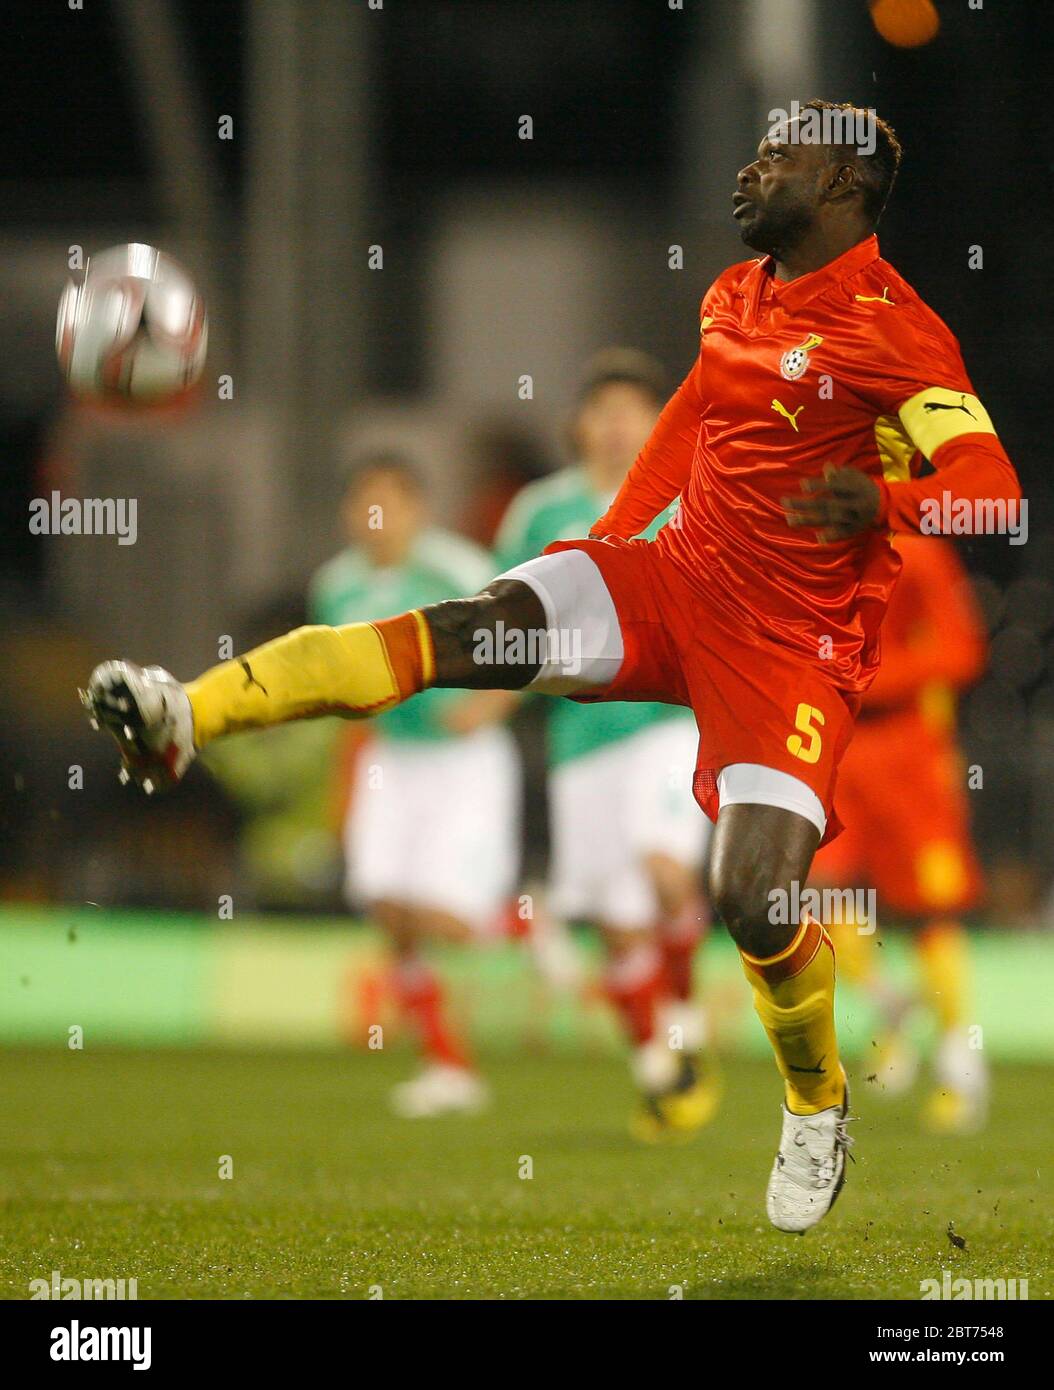 LONDON, UK. MARCH 26: Ghana's John Mensah in action during International Friendly between Mexico City and Ghana at Craven Cottage, Fulham 26 March, 20 Stock Photo